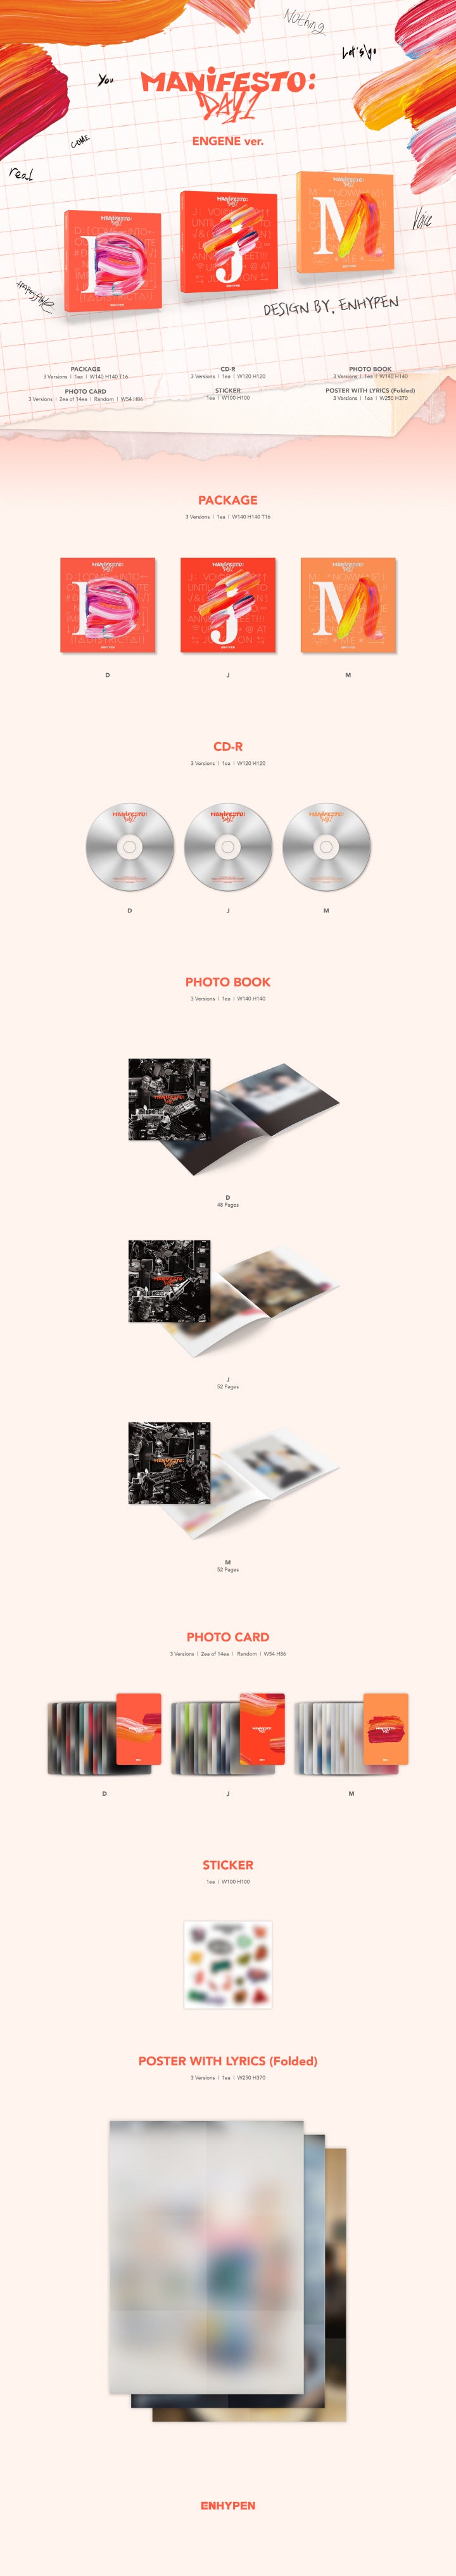 1 CD
1 Photo Book (48 pages)
2 Photo Cards (random out of 14 types)
1 Sticker
1 Folded Poster with Lyrics